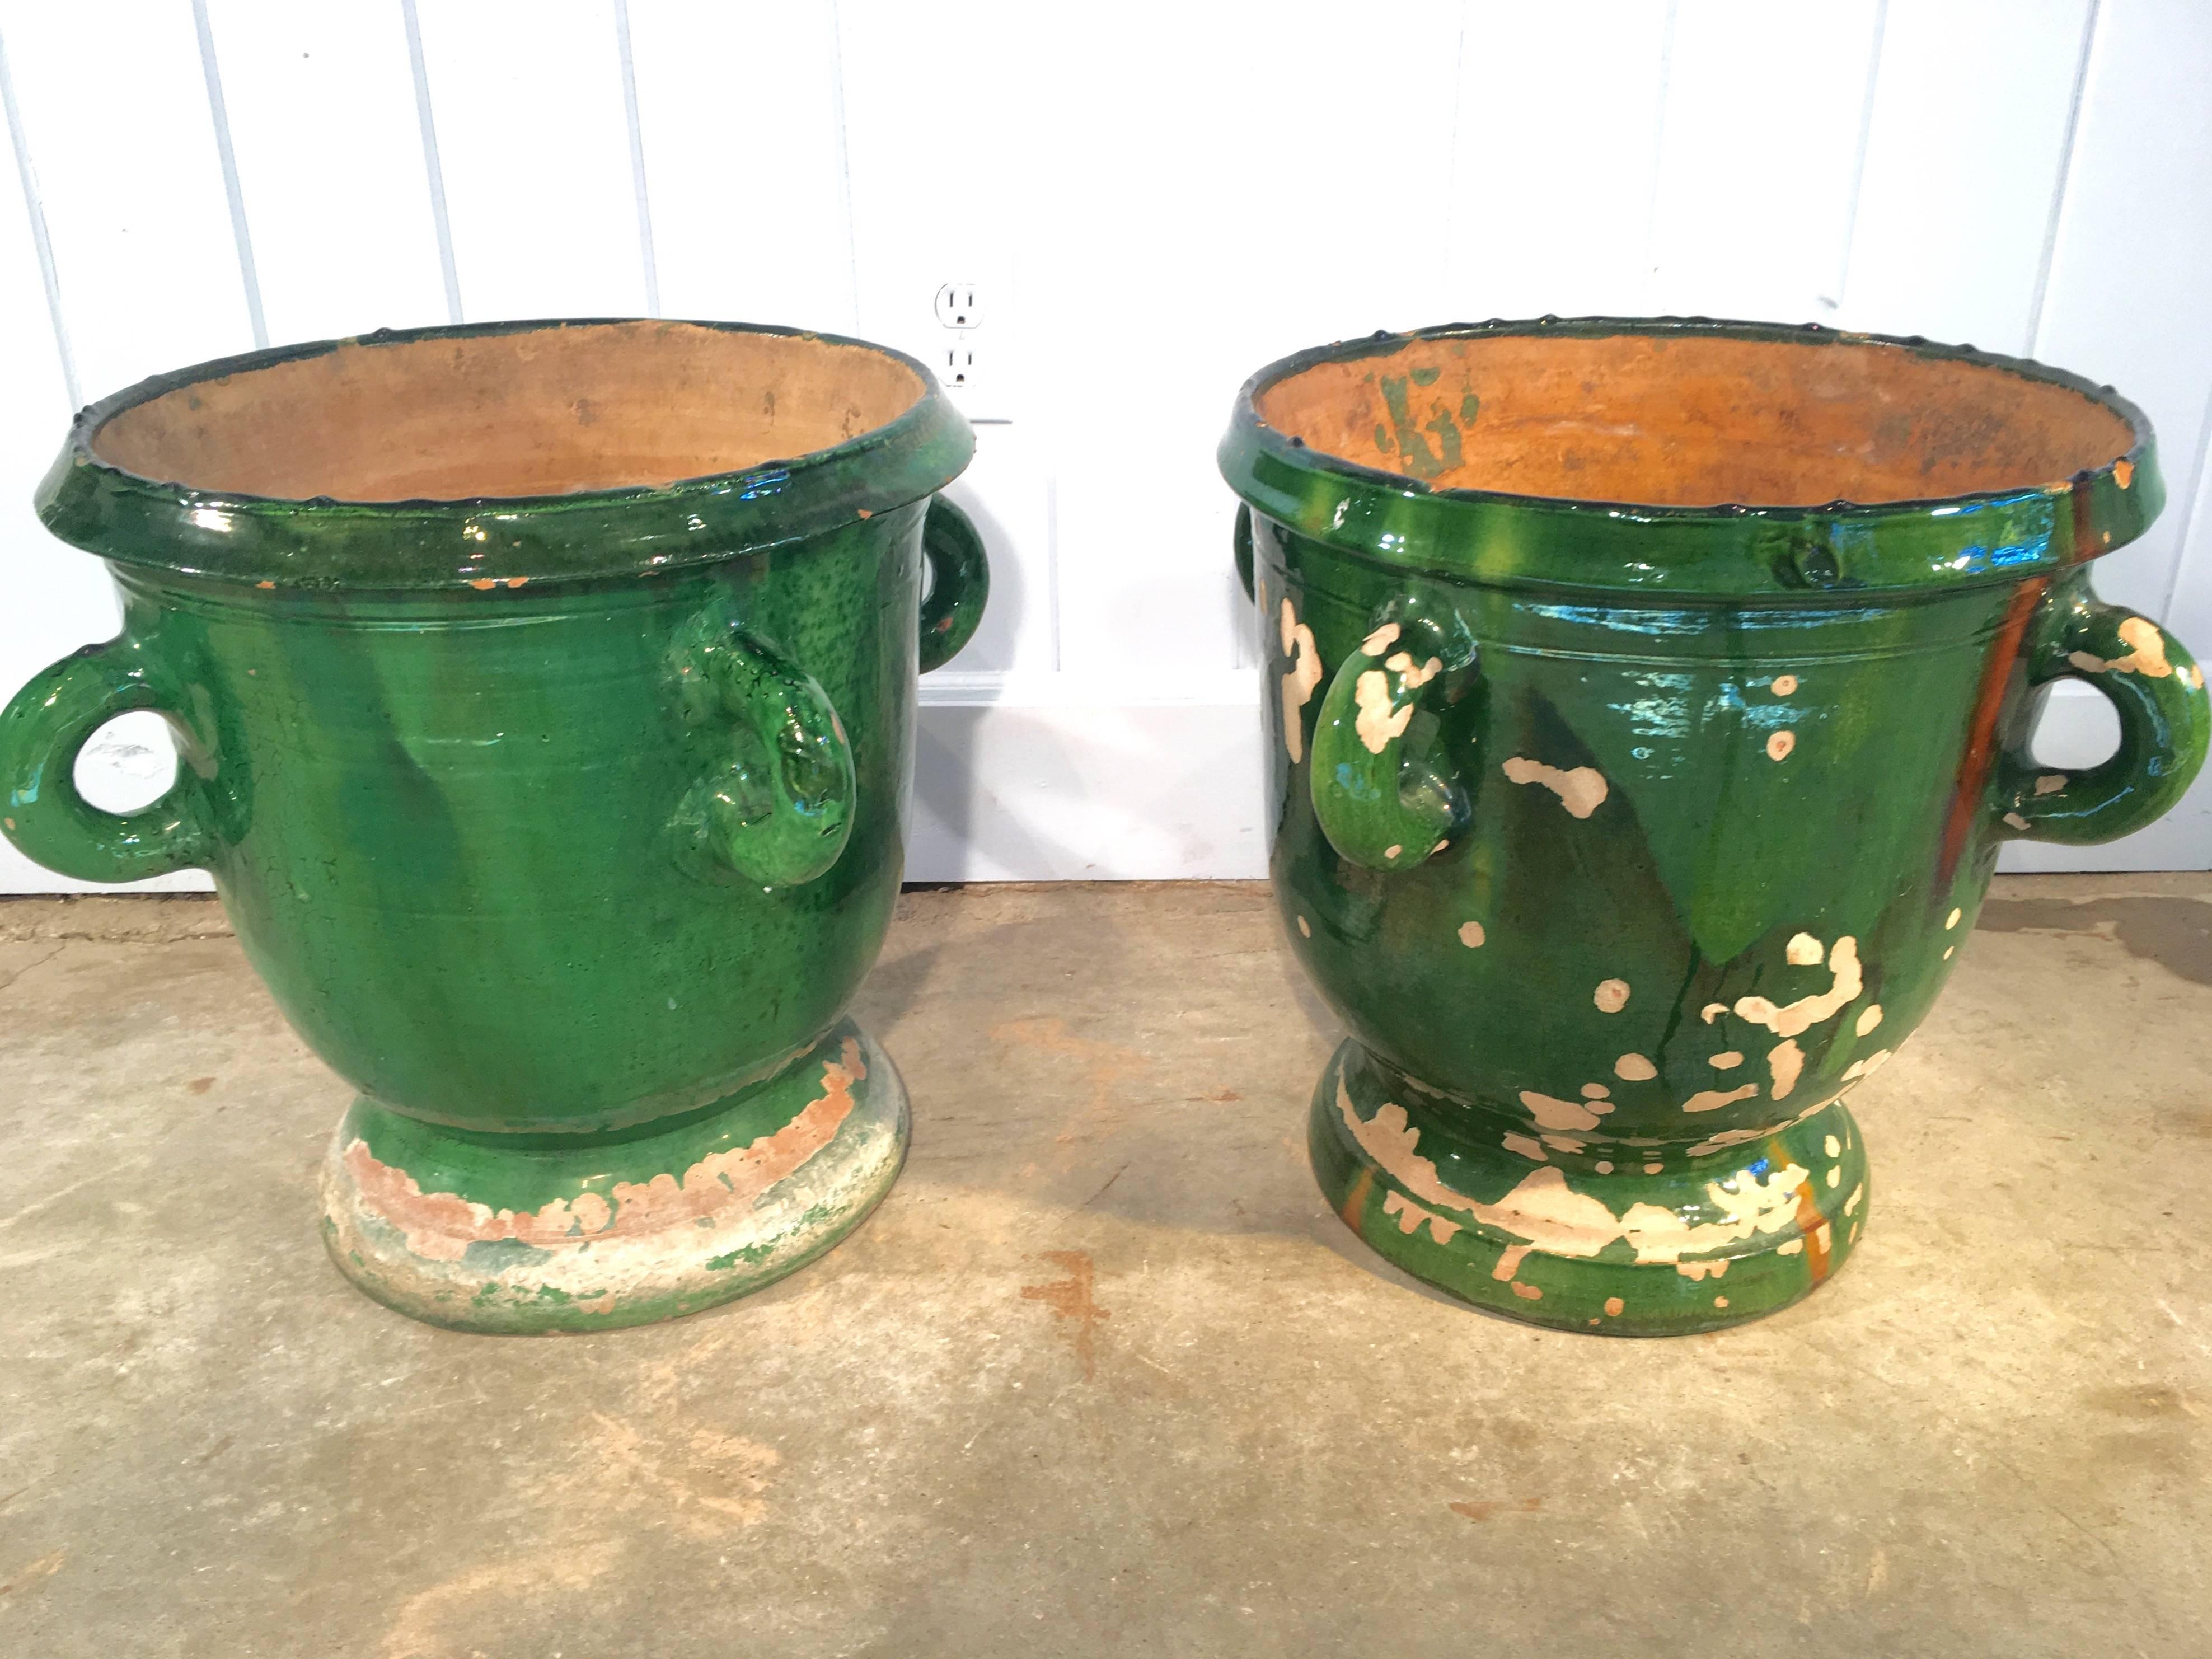 This pair of small handled Castelnaudary pots are amazing for their intense green glaze that is completely intact on one pot and largely intact on the other. They are best paired with our single larger Castelnaudary pot (CPO 1040) or large Anduze